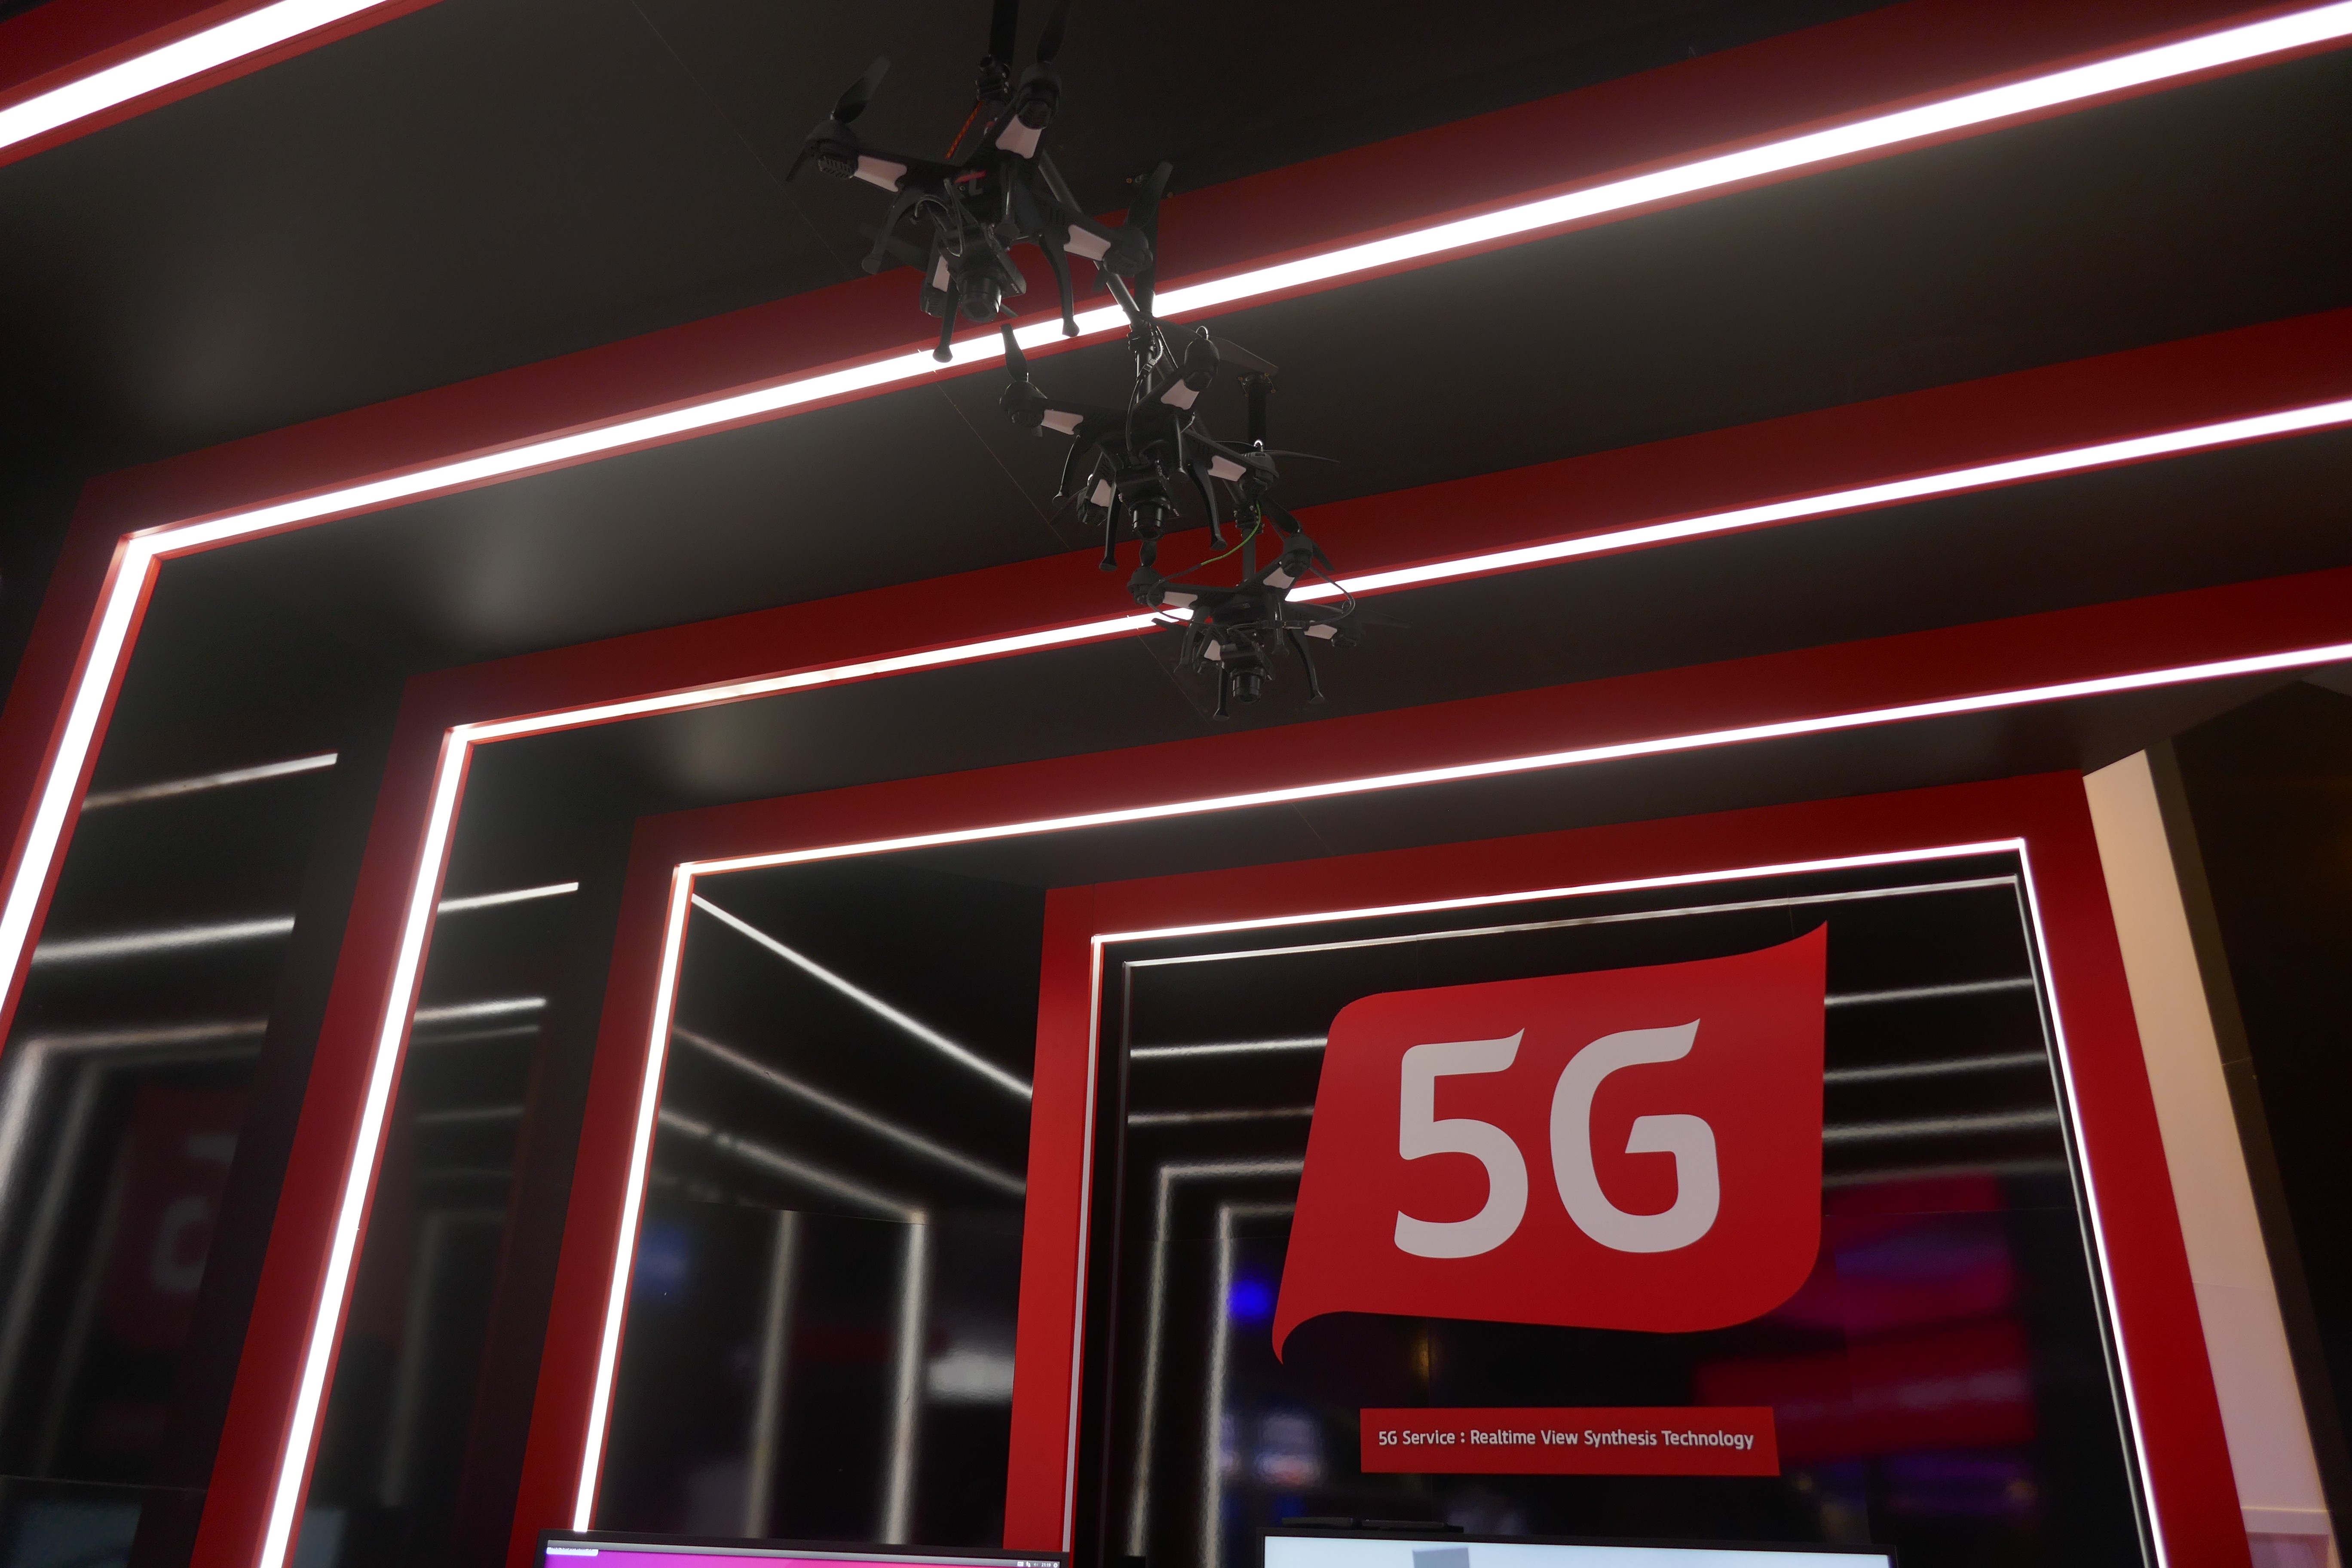 Early adopters of 5G phones will get access to a data superhighway all to themselves, promising not just lightning fast high-resolution downloads but instant connections; the shopping experience will be revolutionised too